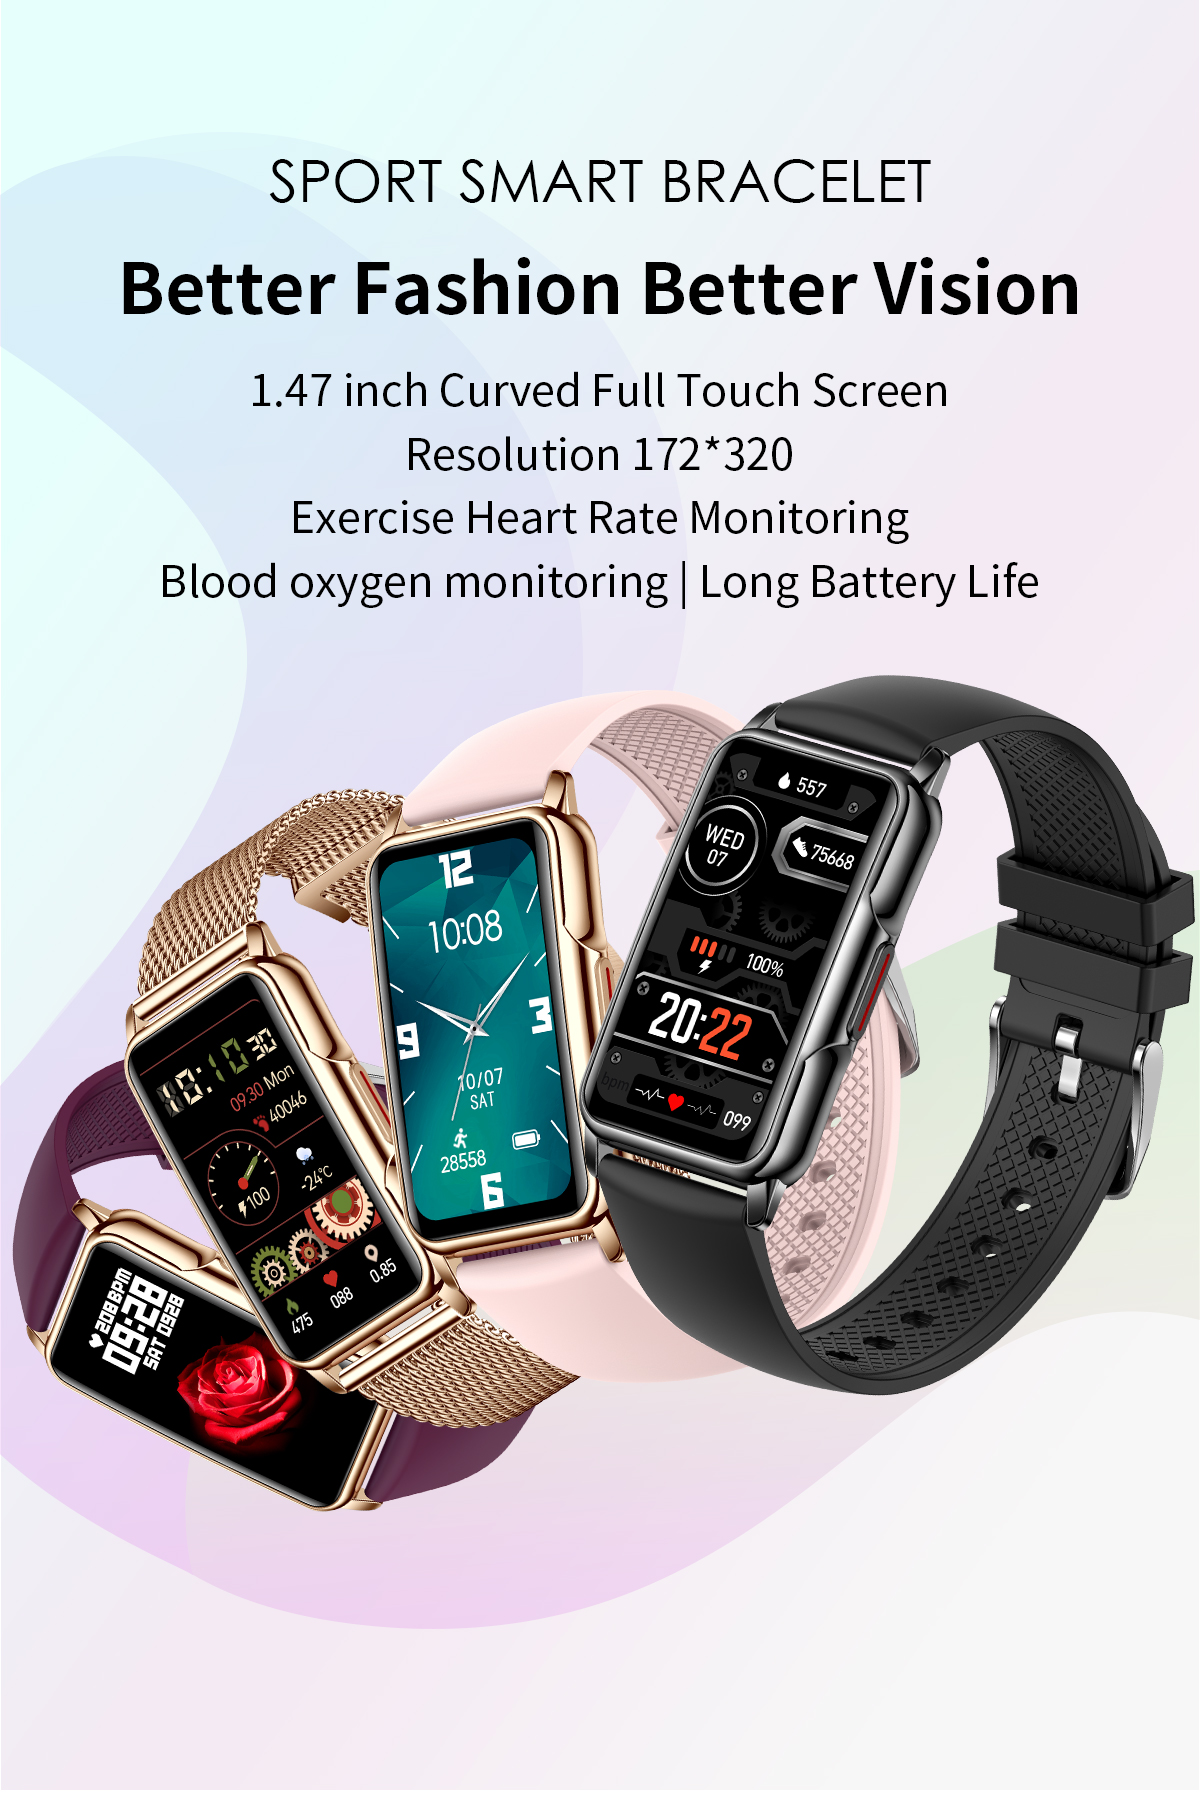 H80 Female Smart Watch | Sport Smart Bracelet | 1.47 Inch Curved Full Touch Screen | Exercise Heart Monitoring | Blood Oxygen Monitoring 1